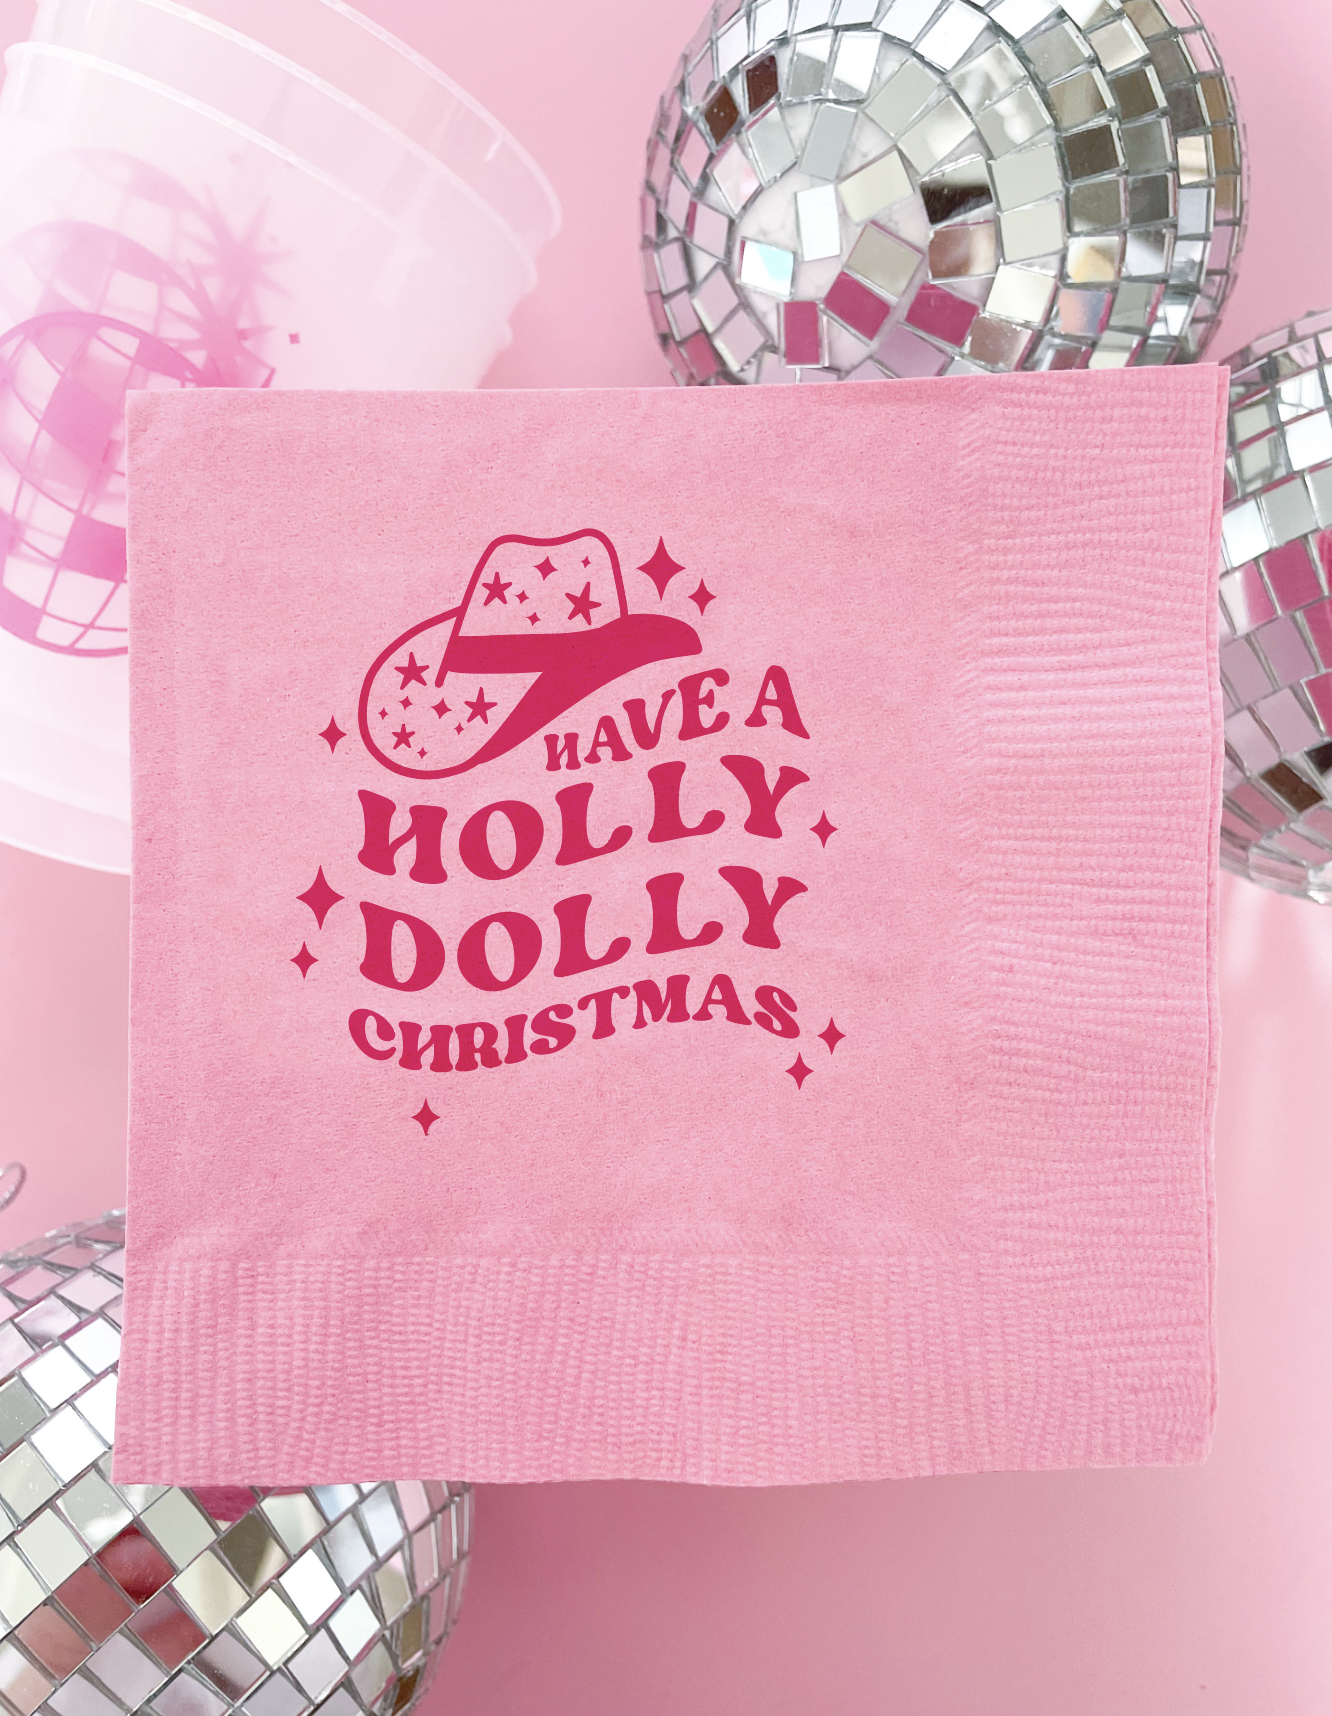 Cowgirl Holly Dolly Christmas Napkins